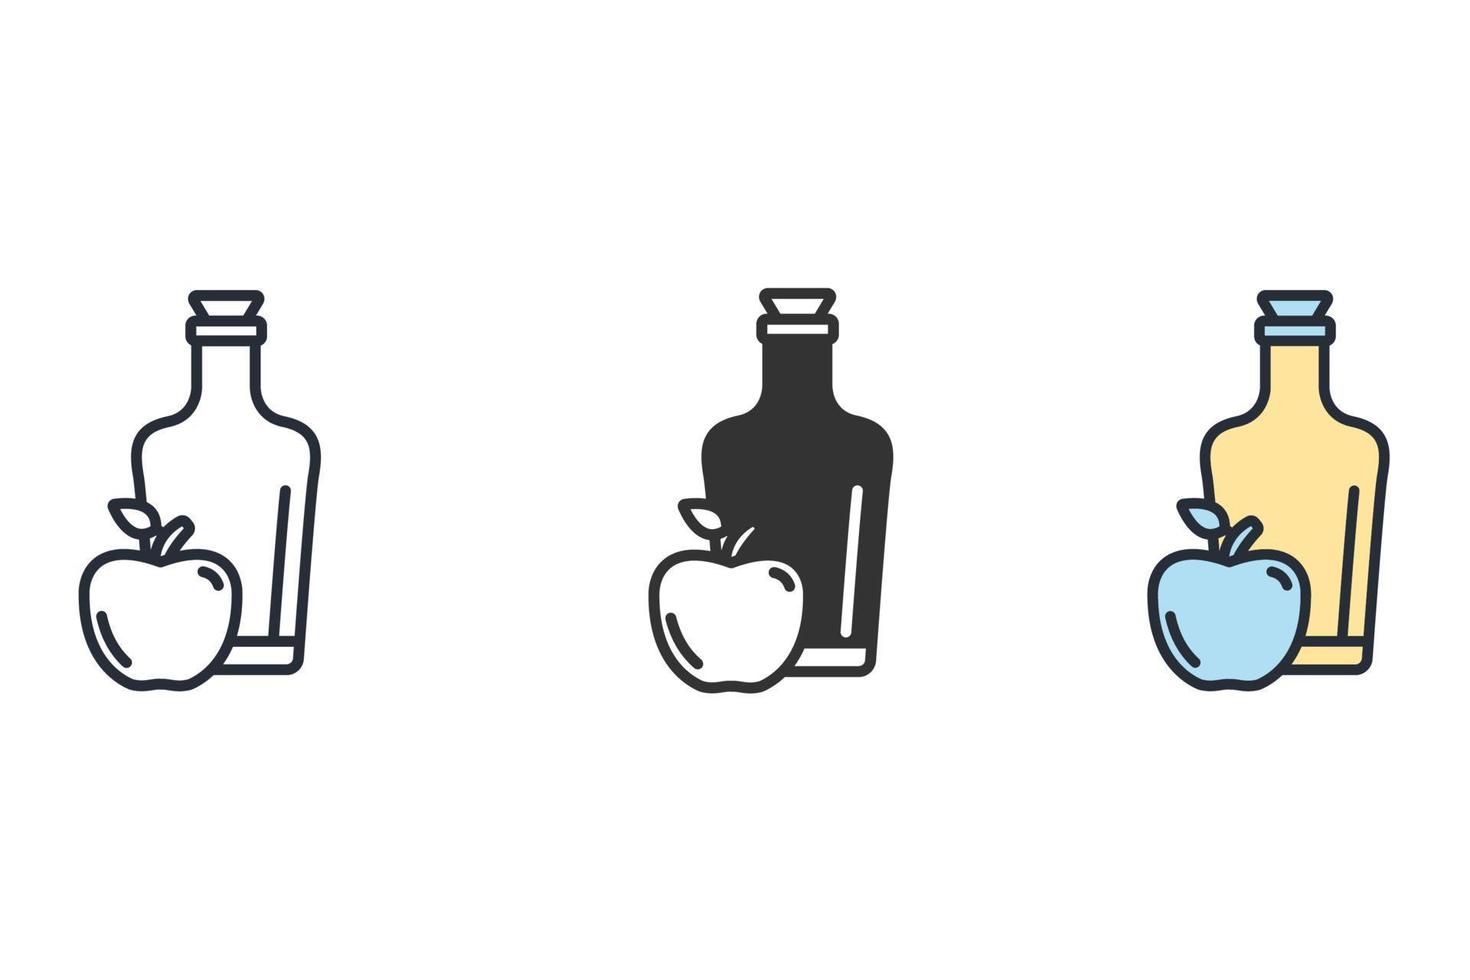 Cider icons  symbol vector elements for infographic web